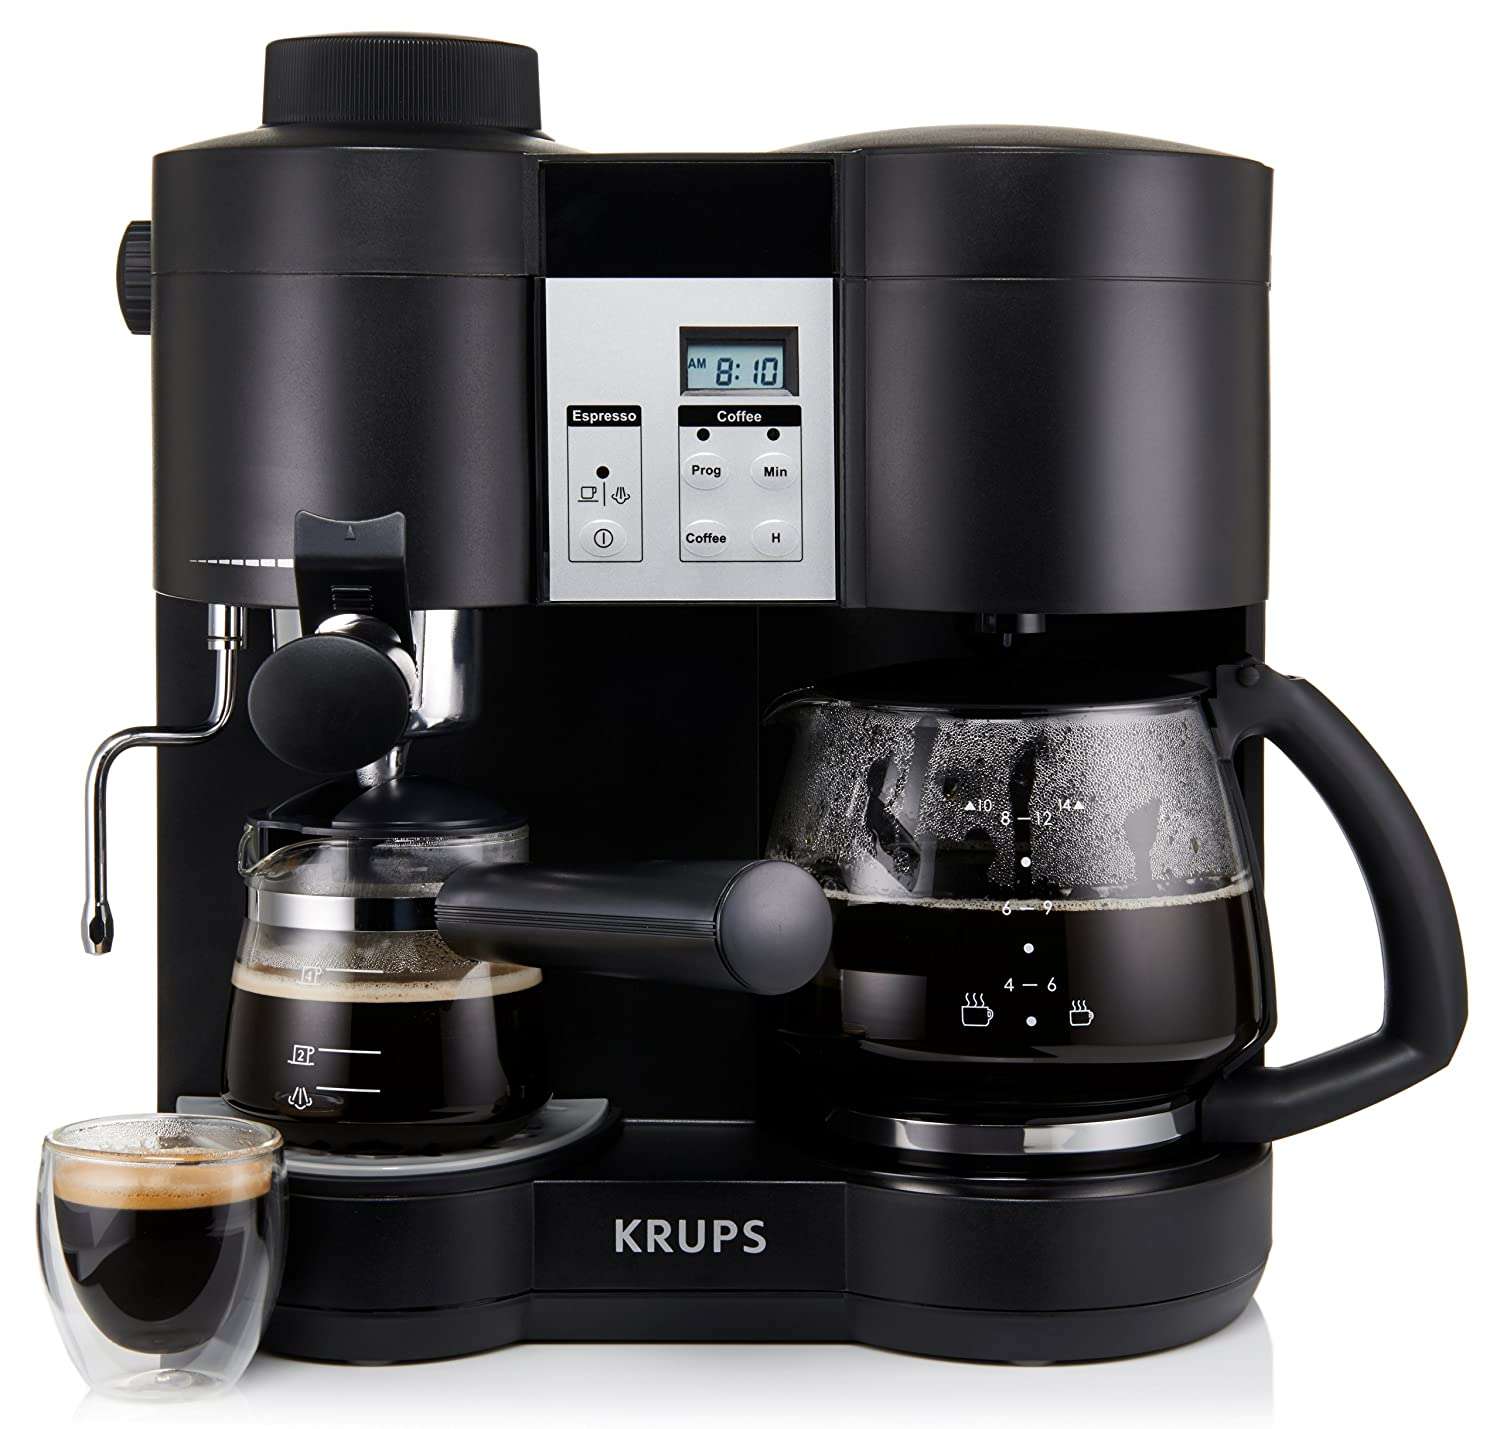 How to Find the Best Coffee Maker for Your Home